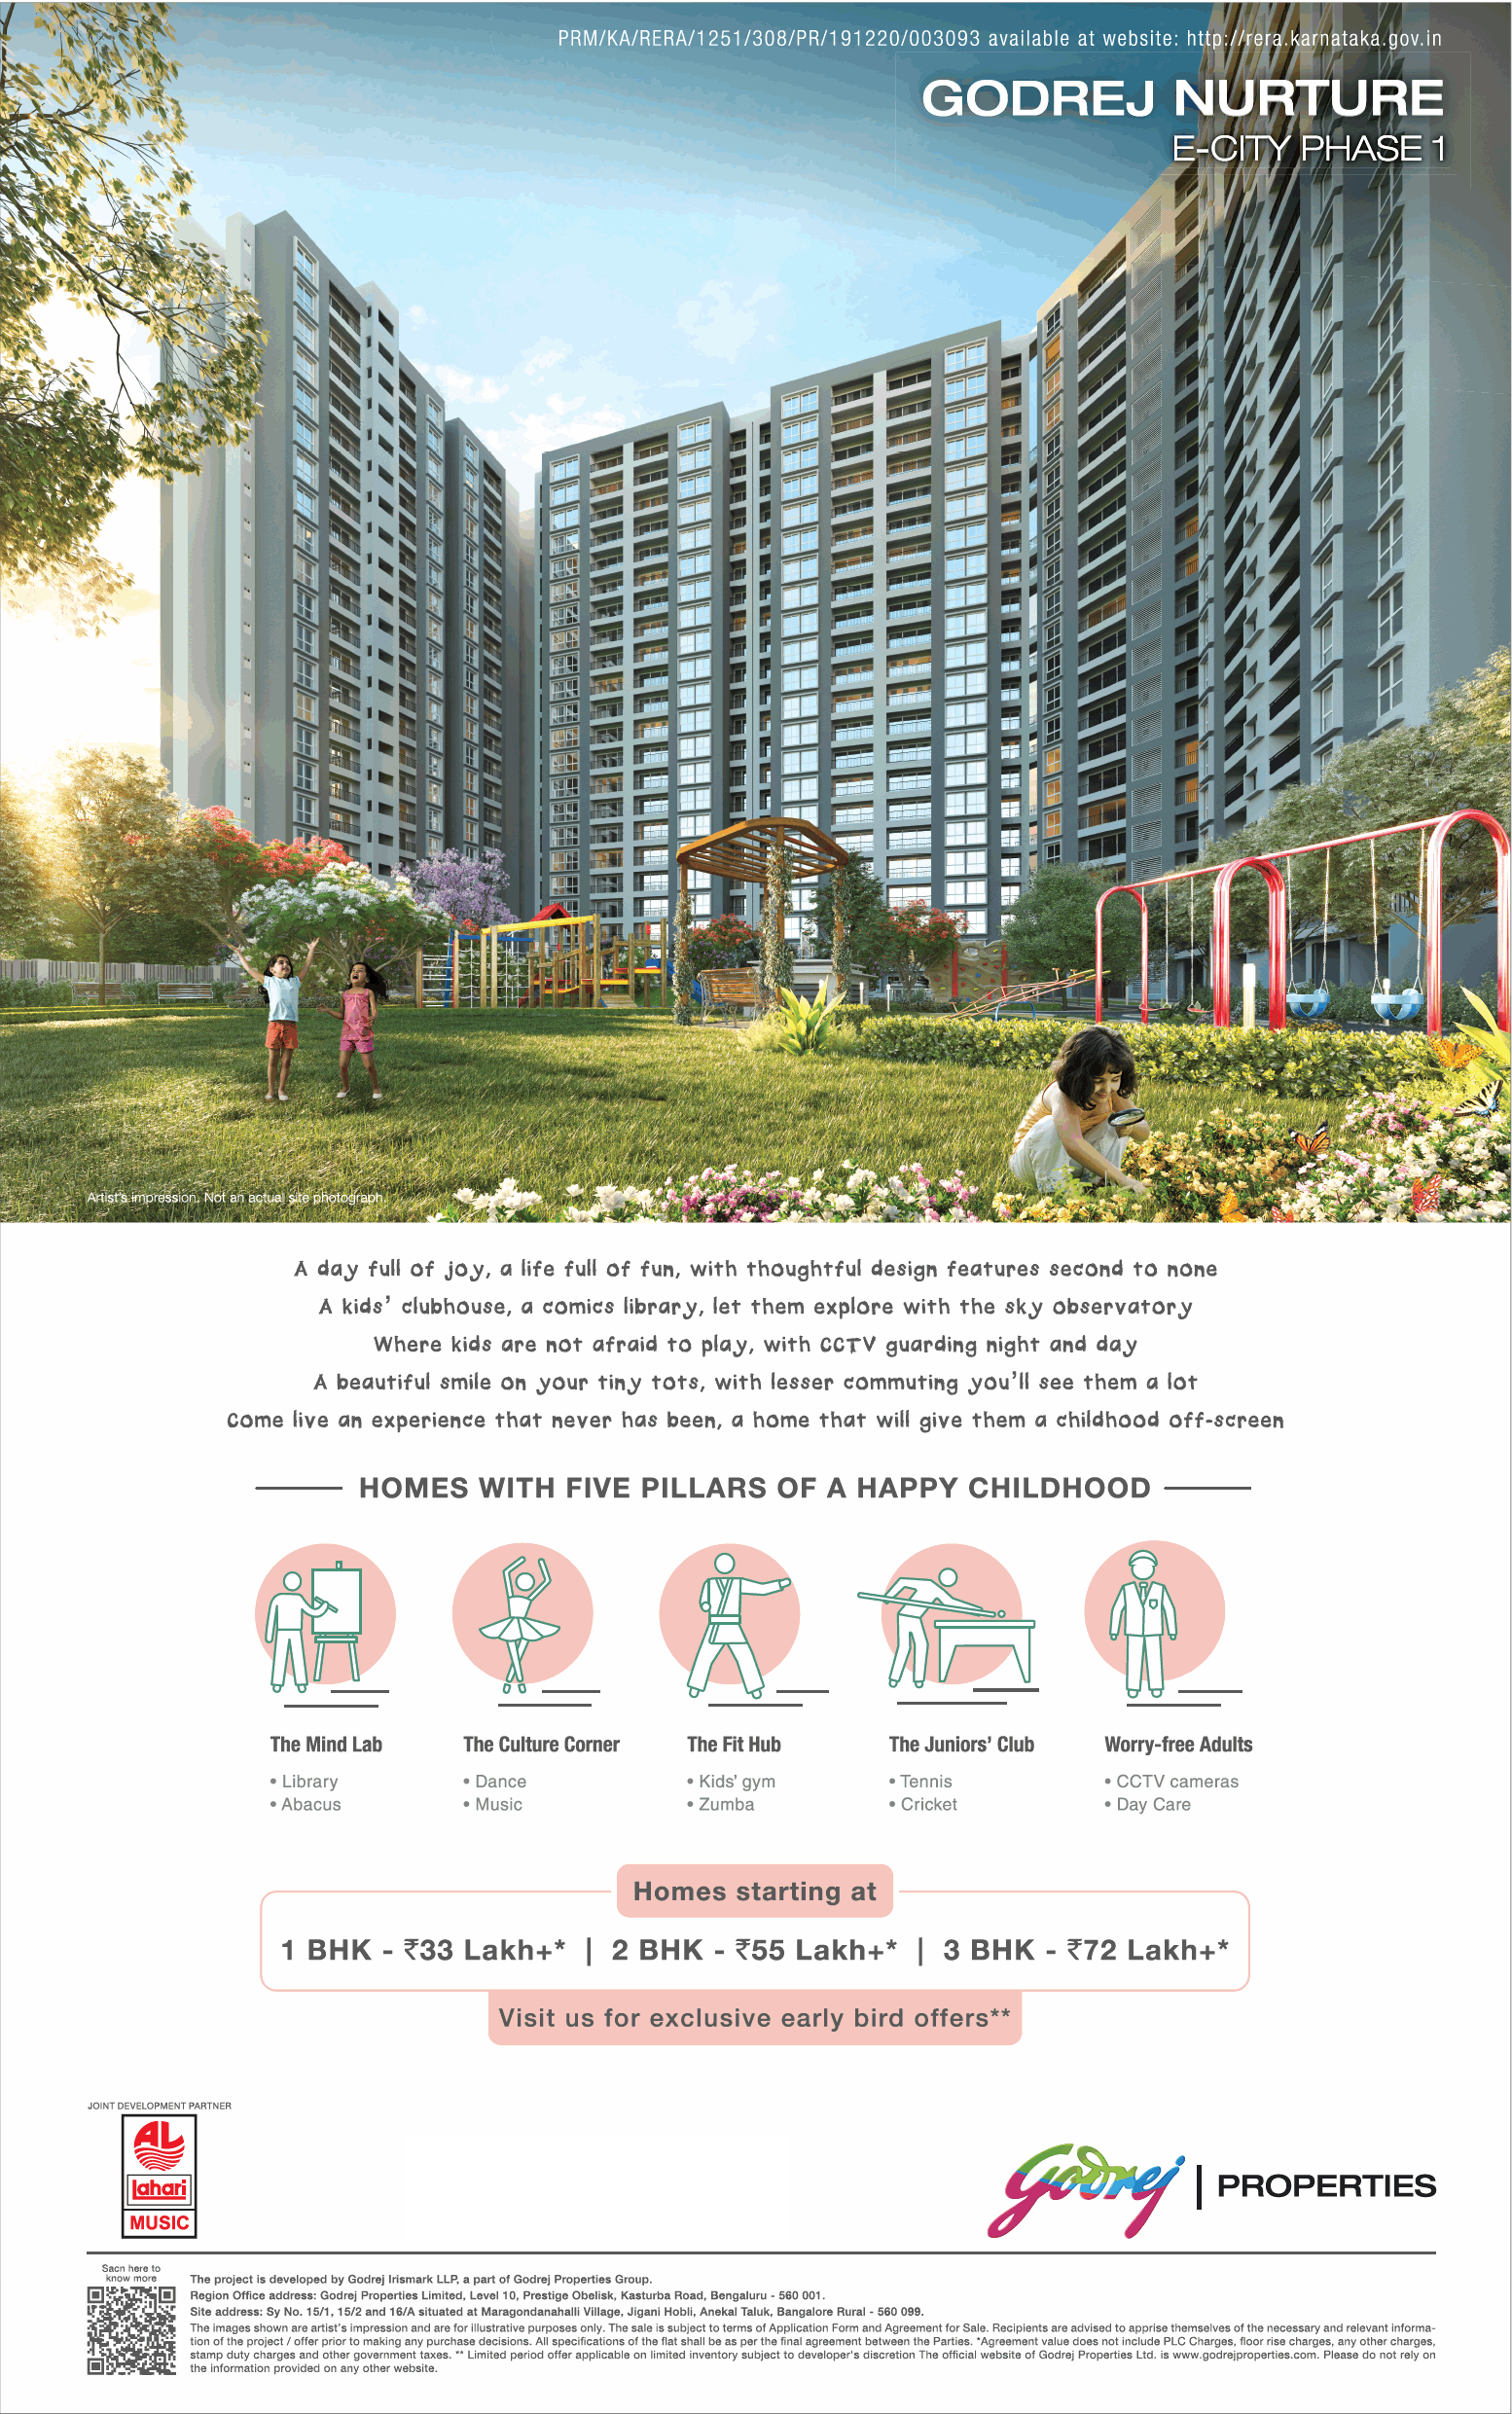 Book 1, 2 & 3 BHK Rs 33 Lac at Godrej Nurture in E-City Phase 1, Bangalore